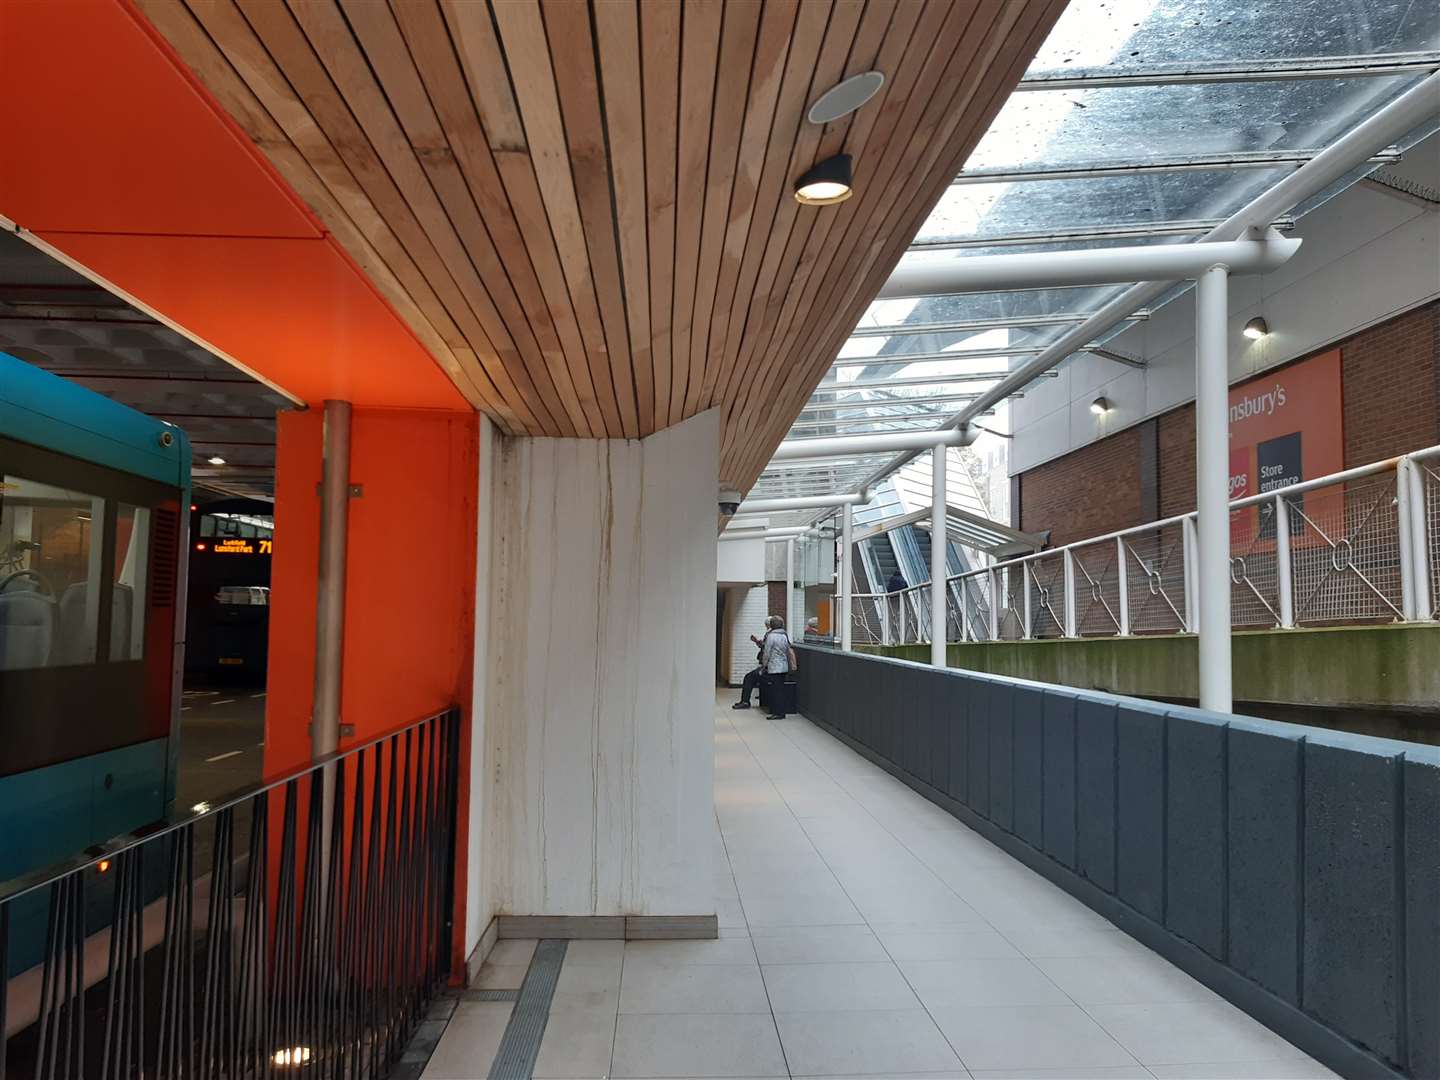 The town centre's main bus station had a £1.5m renovation in 2021